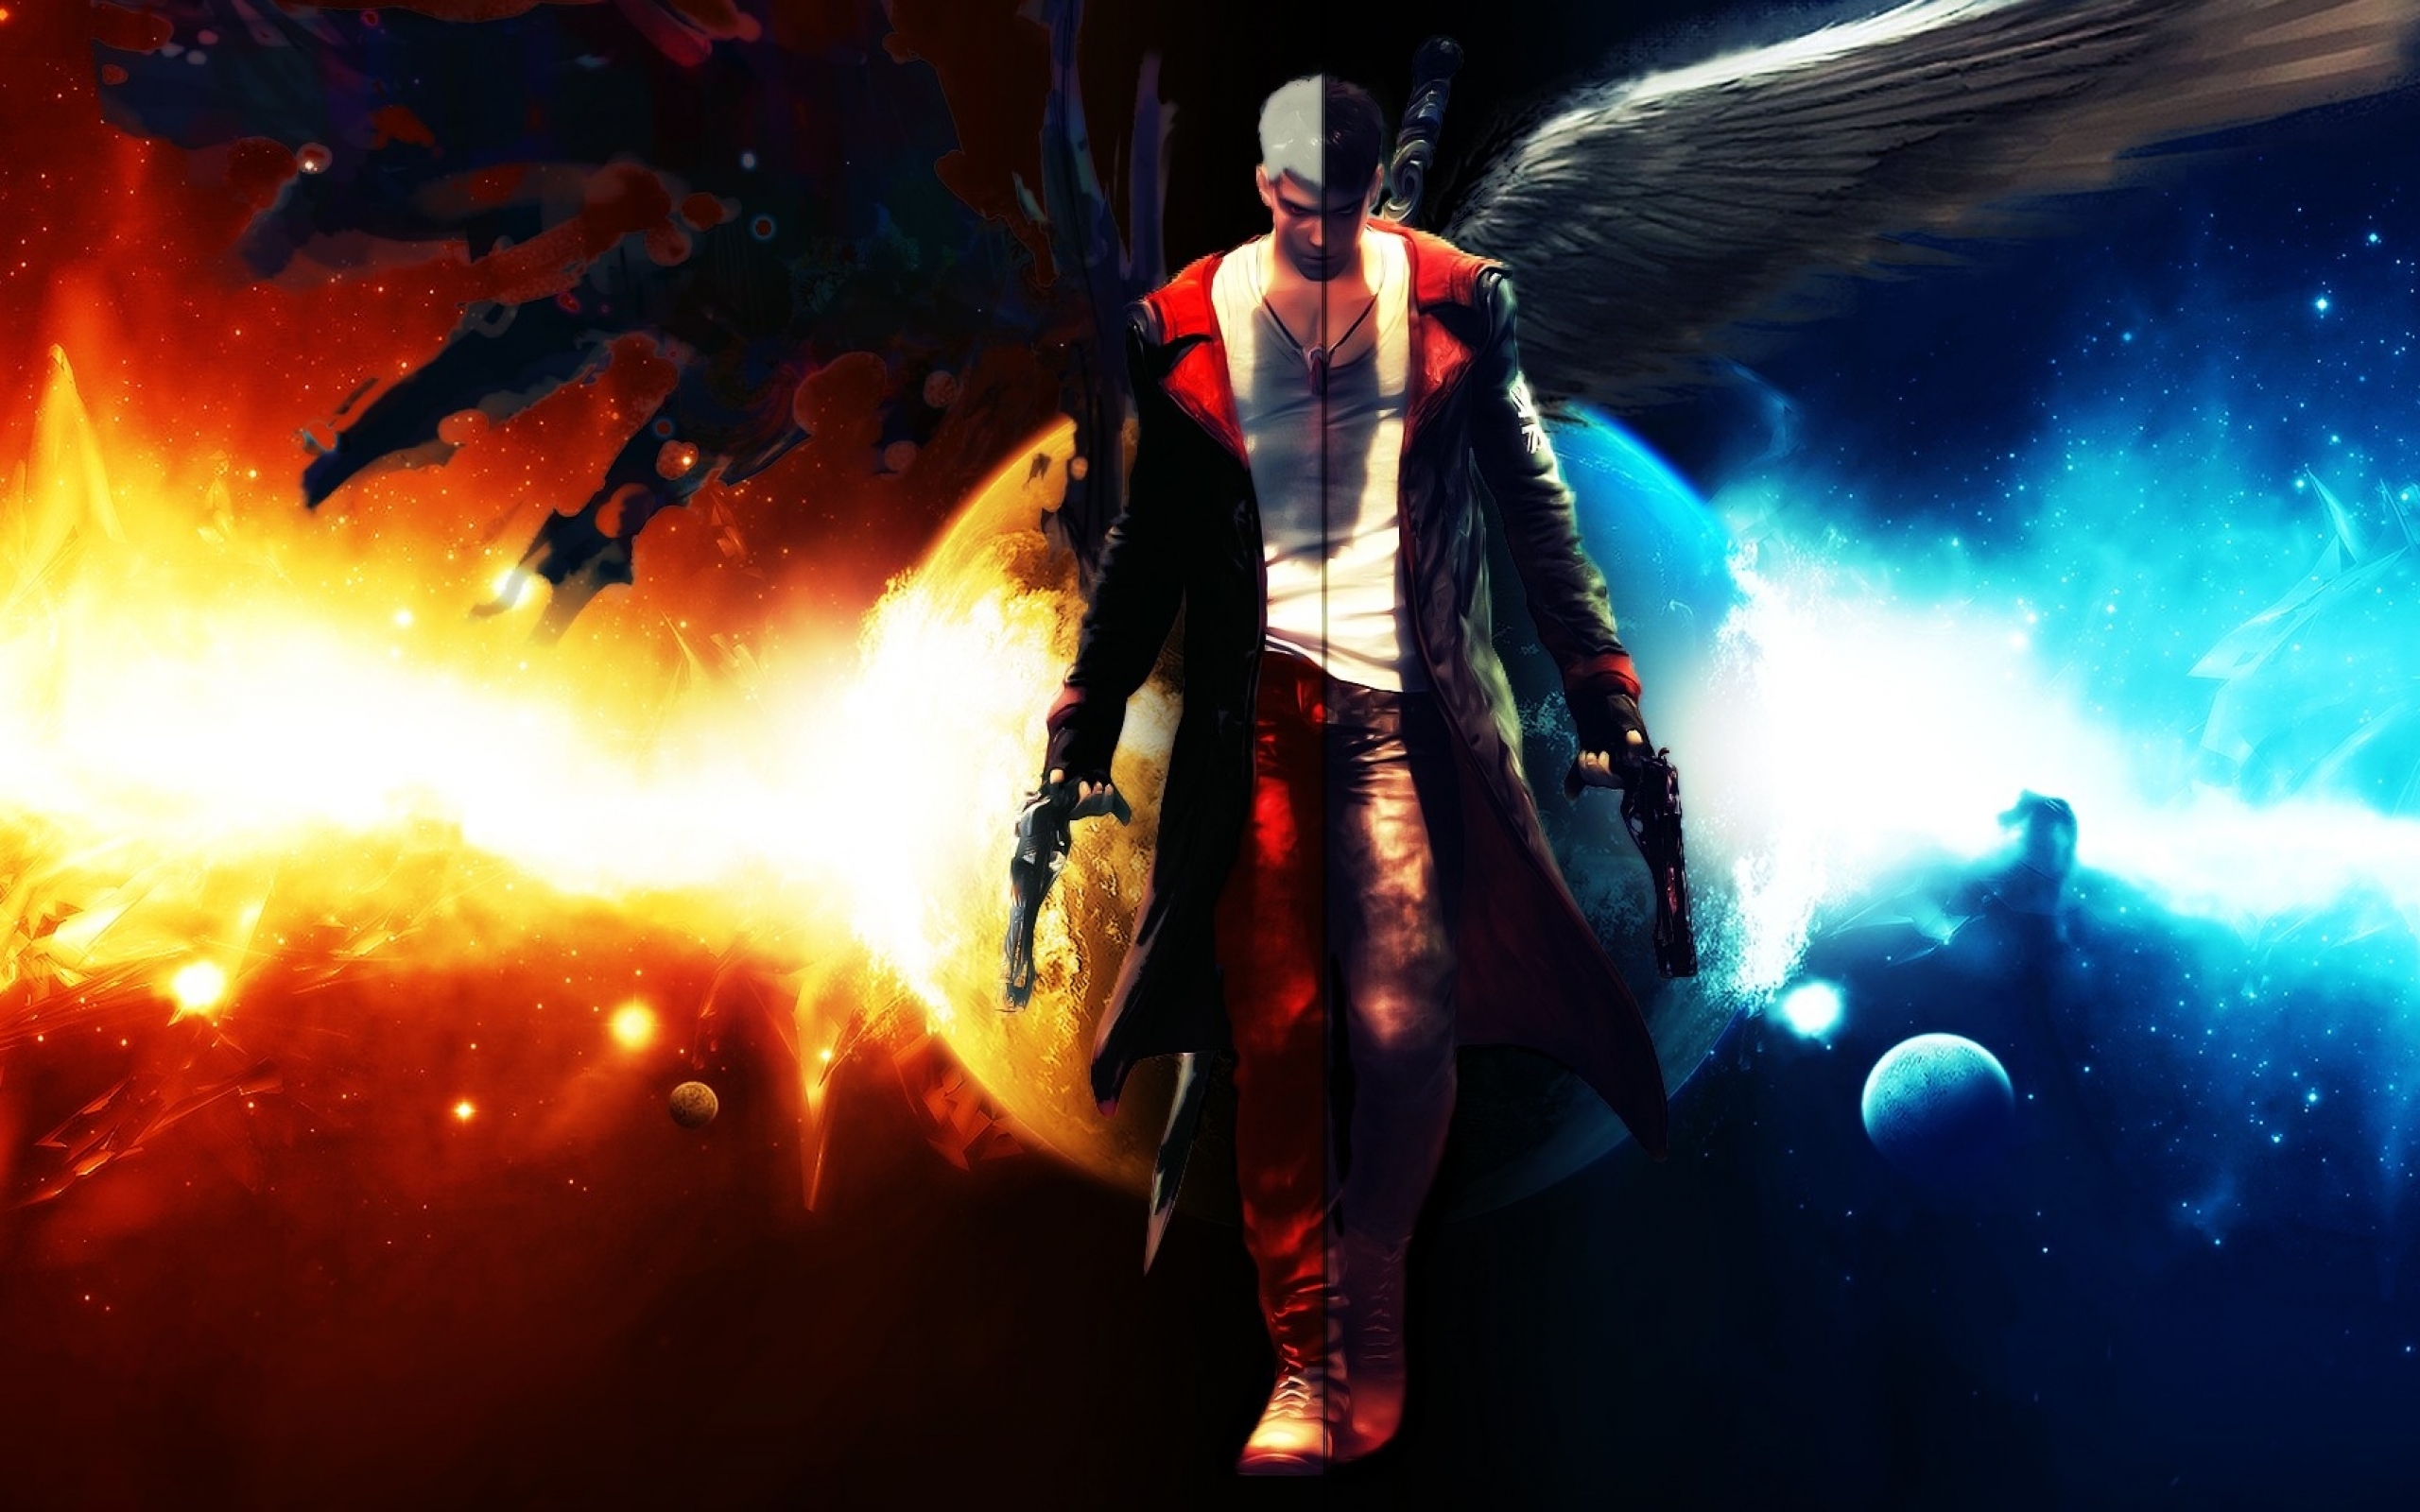 Download Wallpapers, Download 2560x1600 devil may cry 5 dmc devils